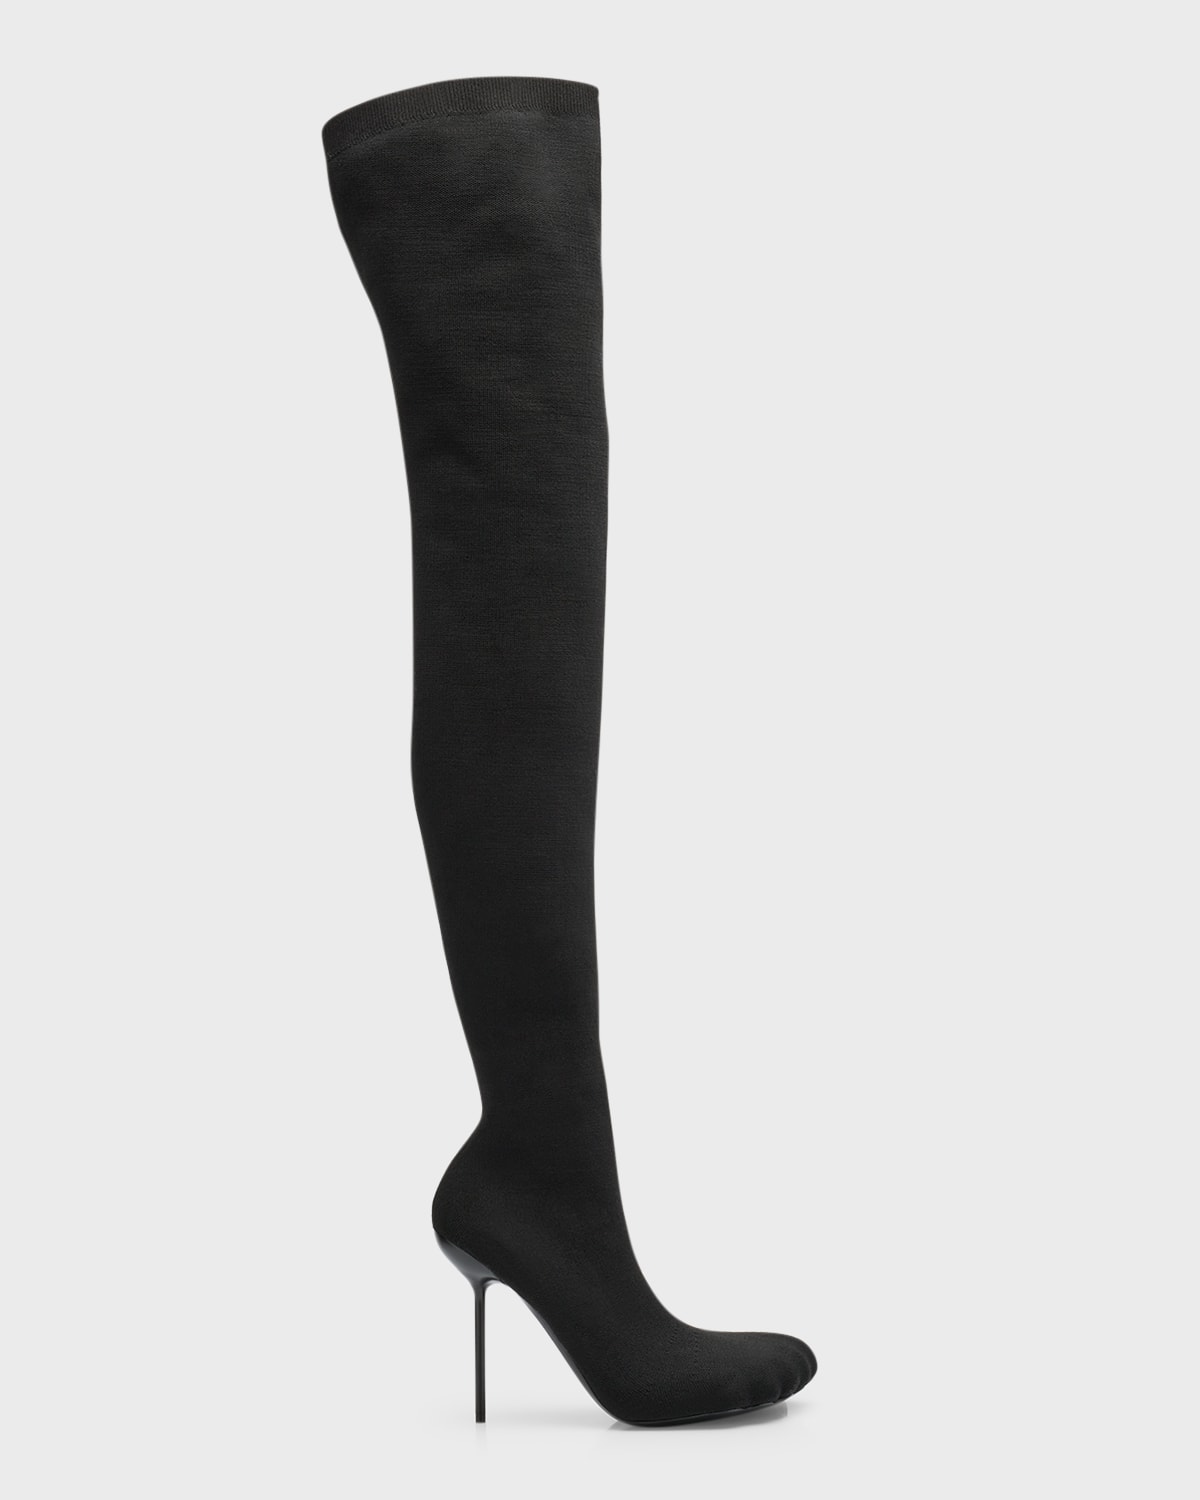 Anatomic 110mm Over-The-Knee Boots